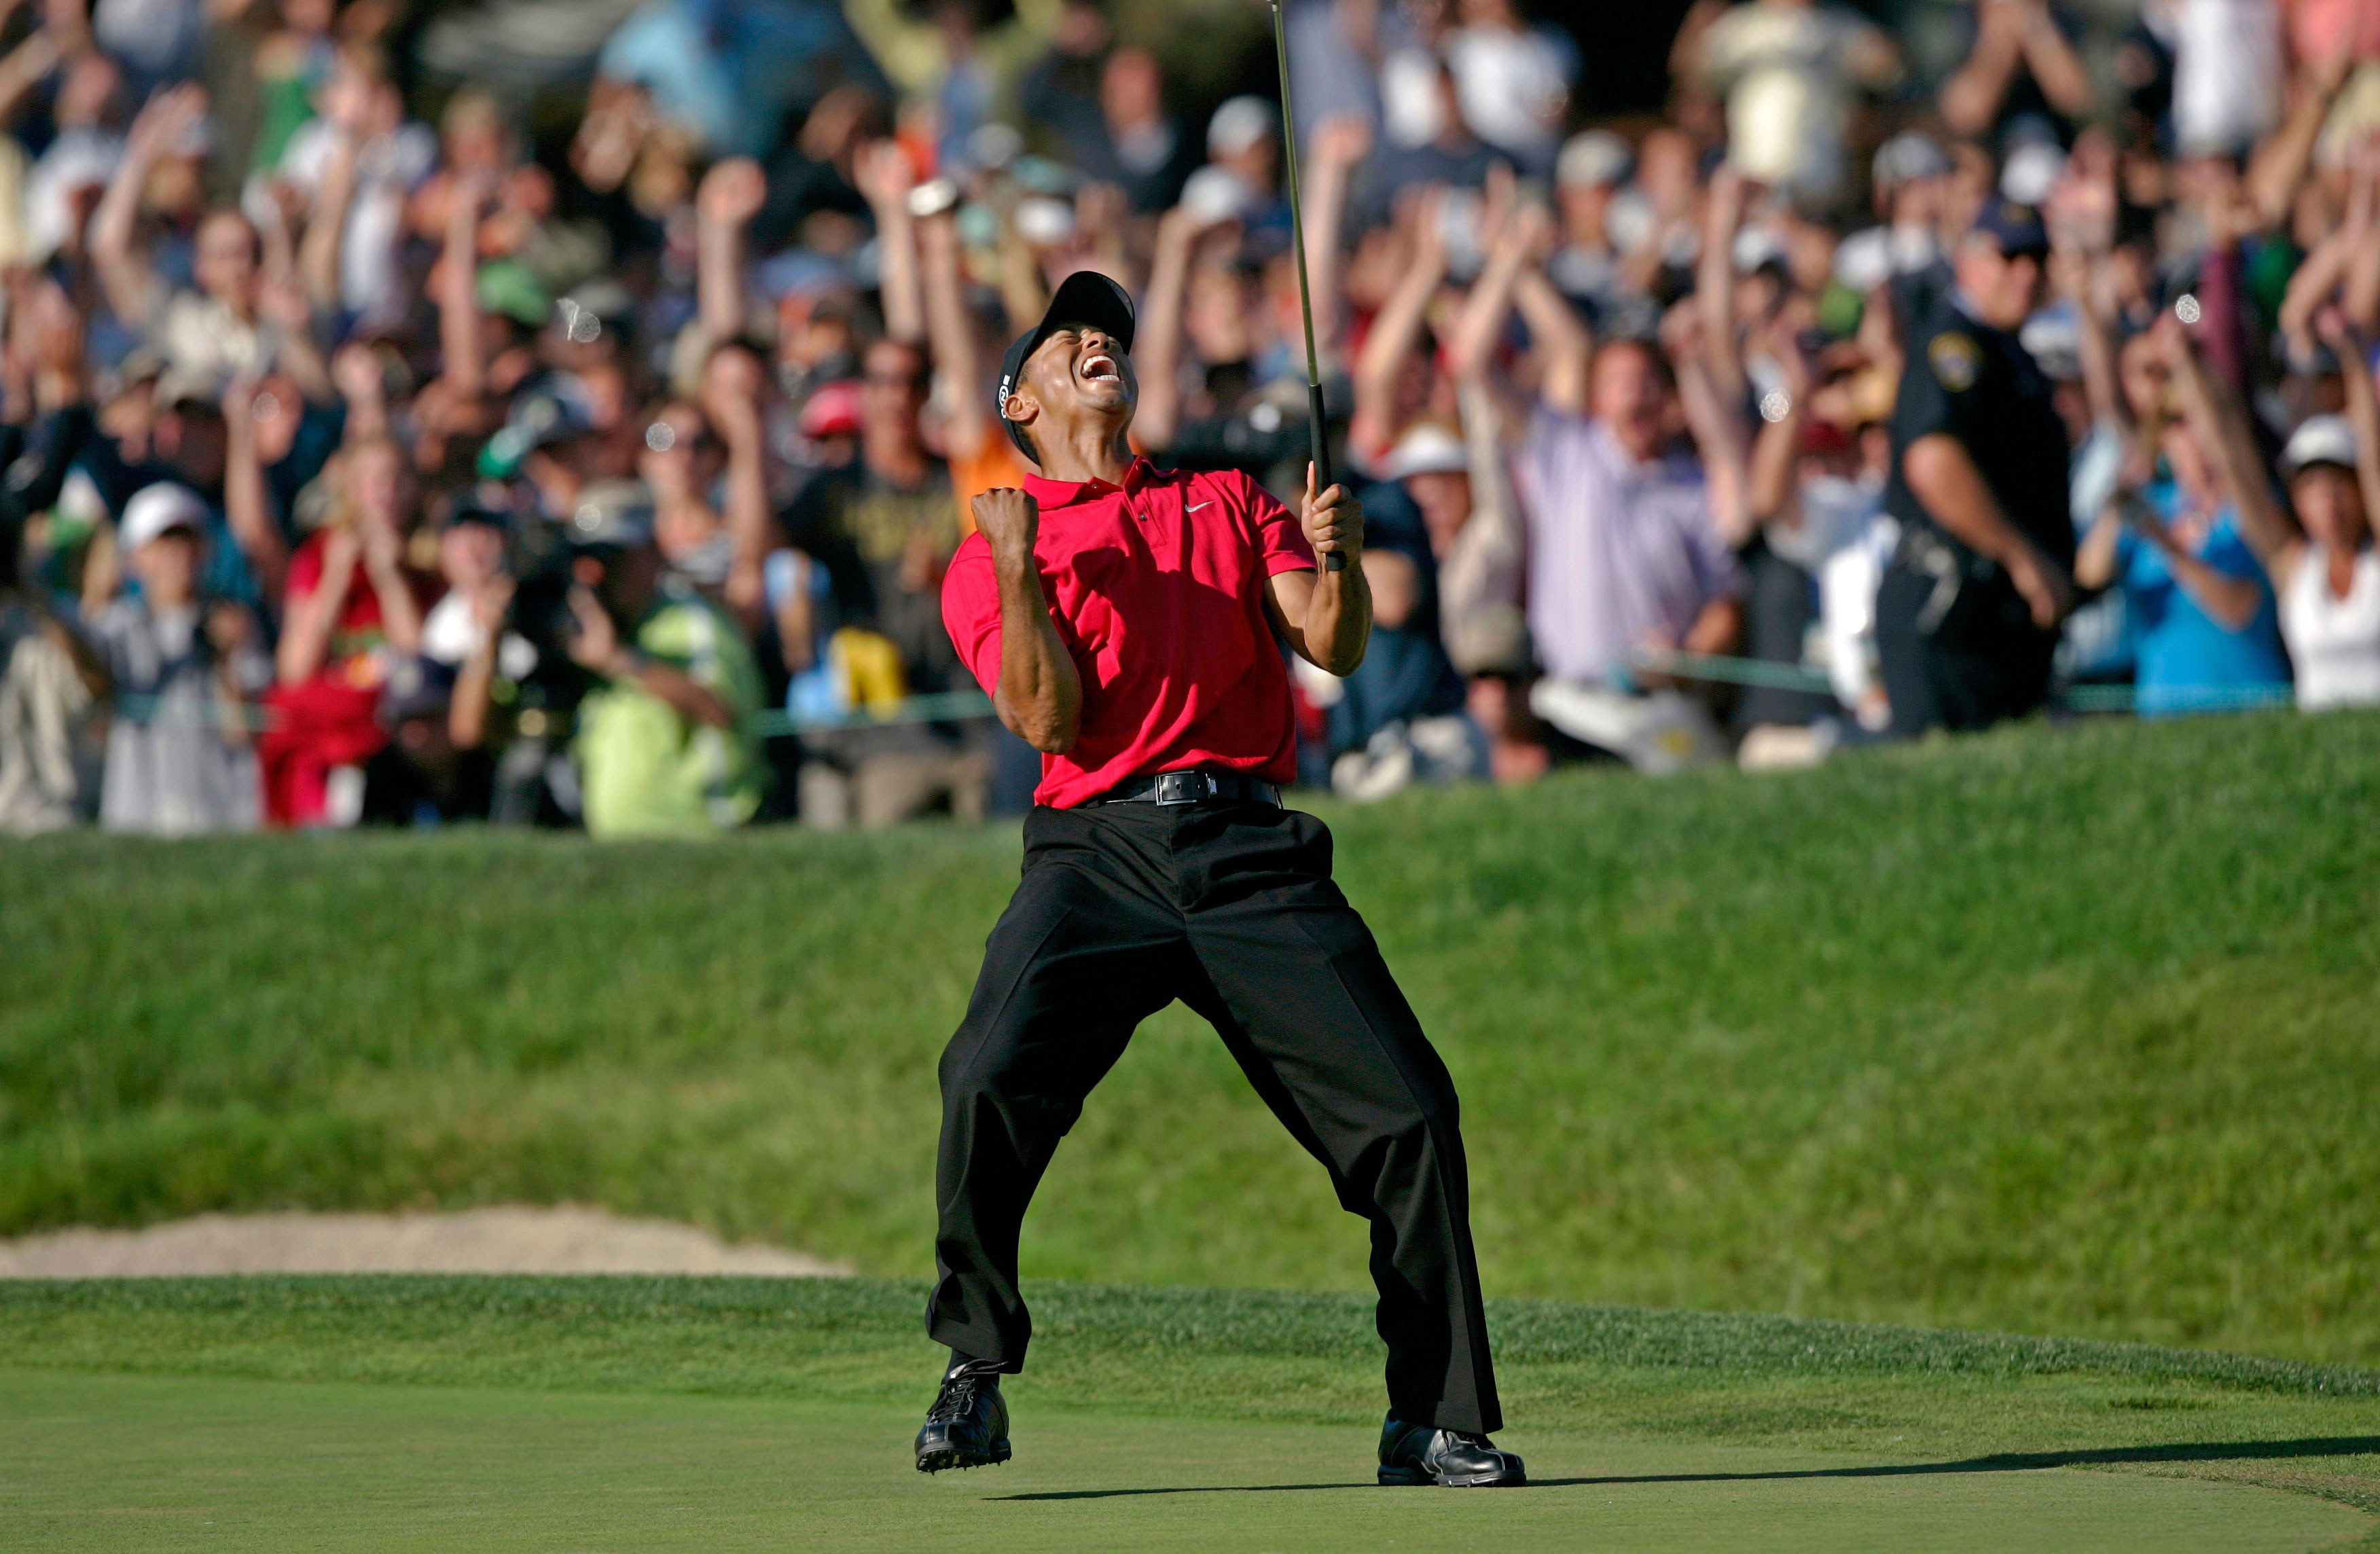 Tiger Woods – The World’s Greatest Golfer